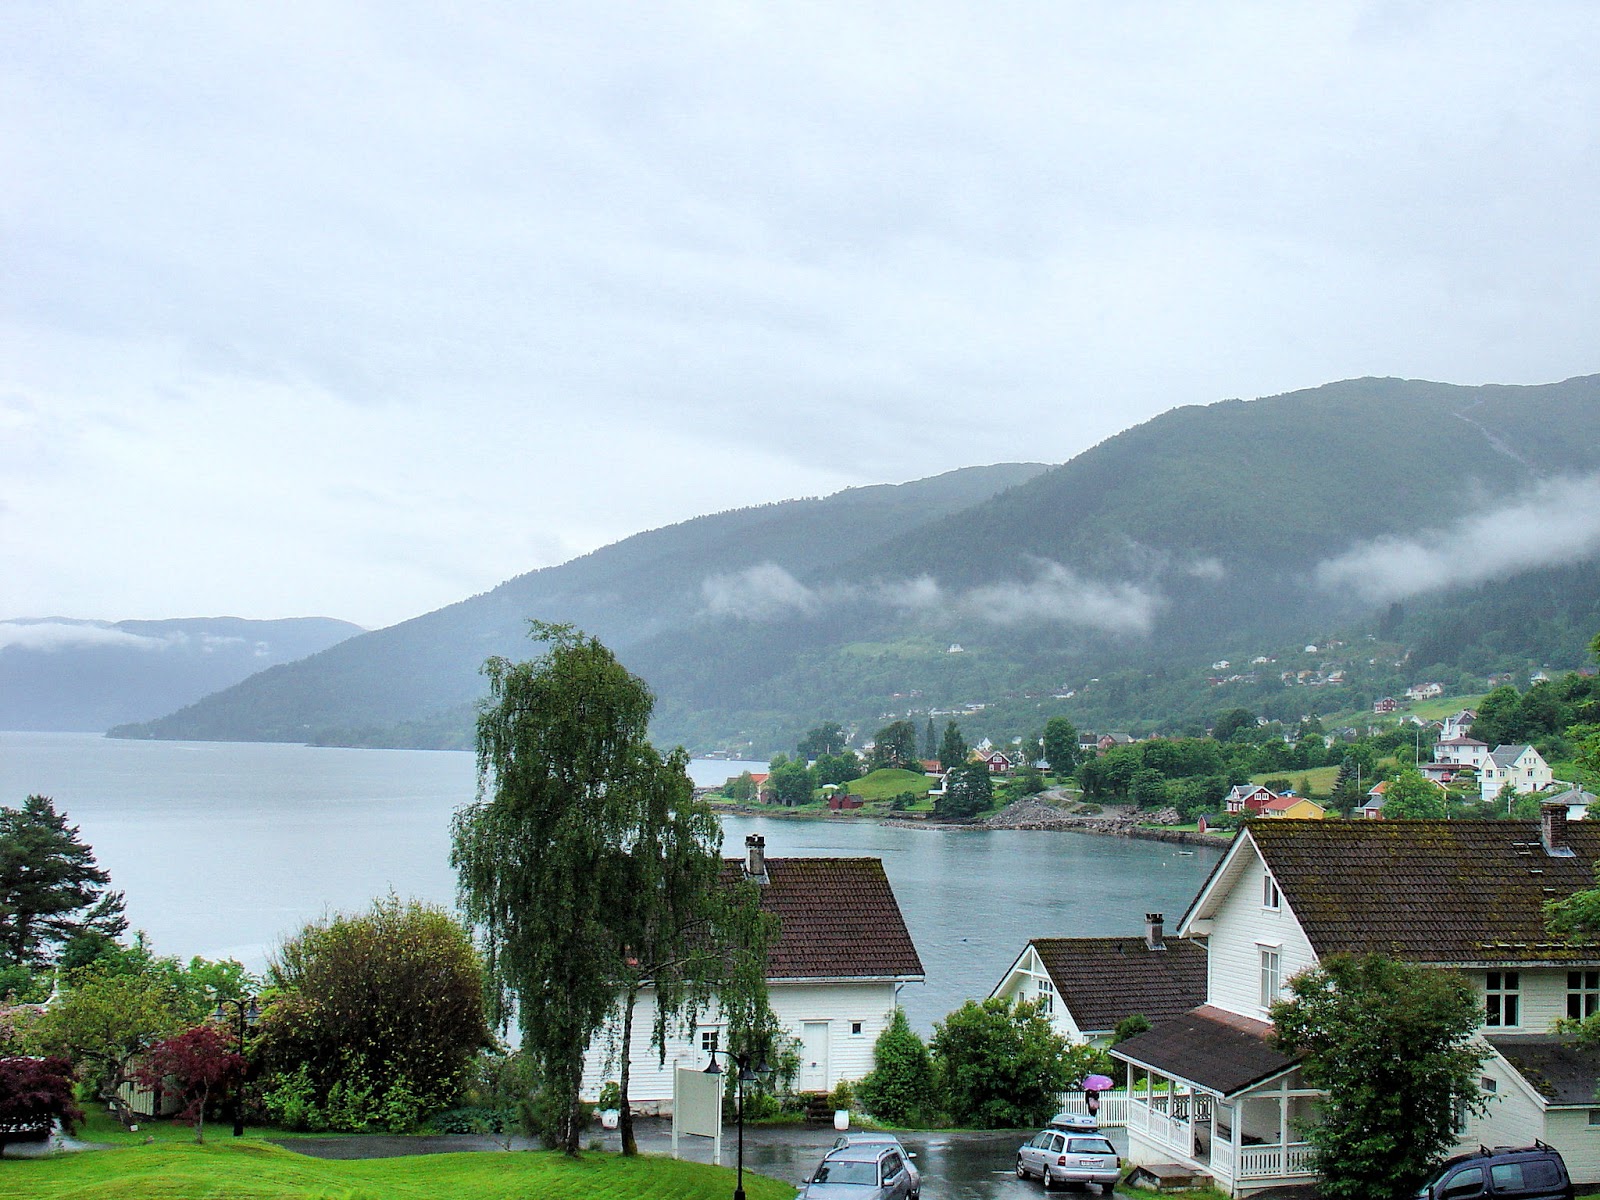 The enchanting village of Balestrand, Norway. Things haven't changed much since Astrup's time. Photo: EuroTravelogue™. Unauthorized use is prohibited.